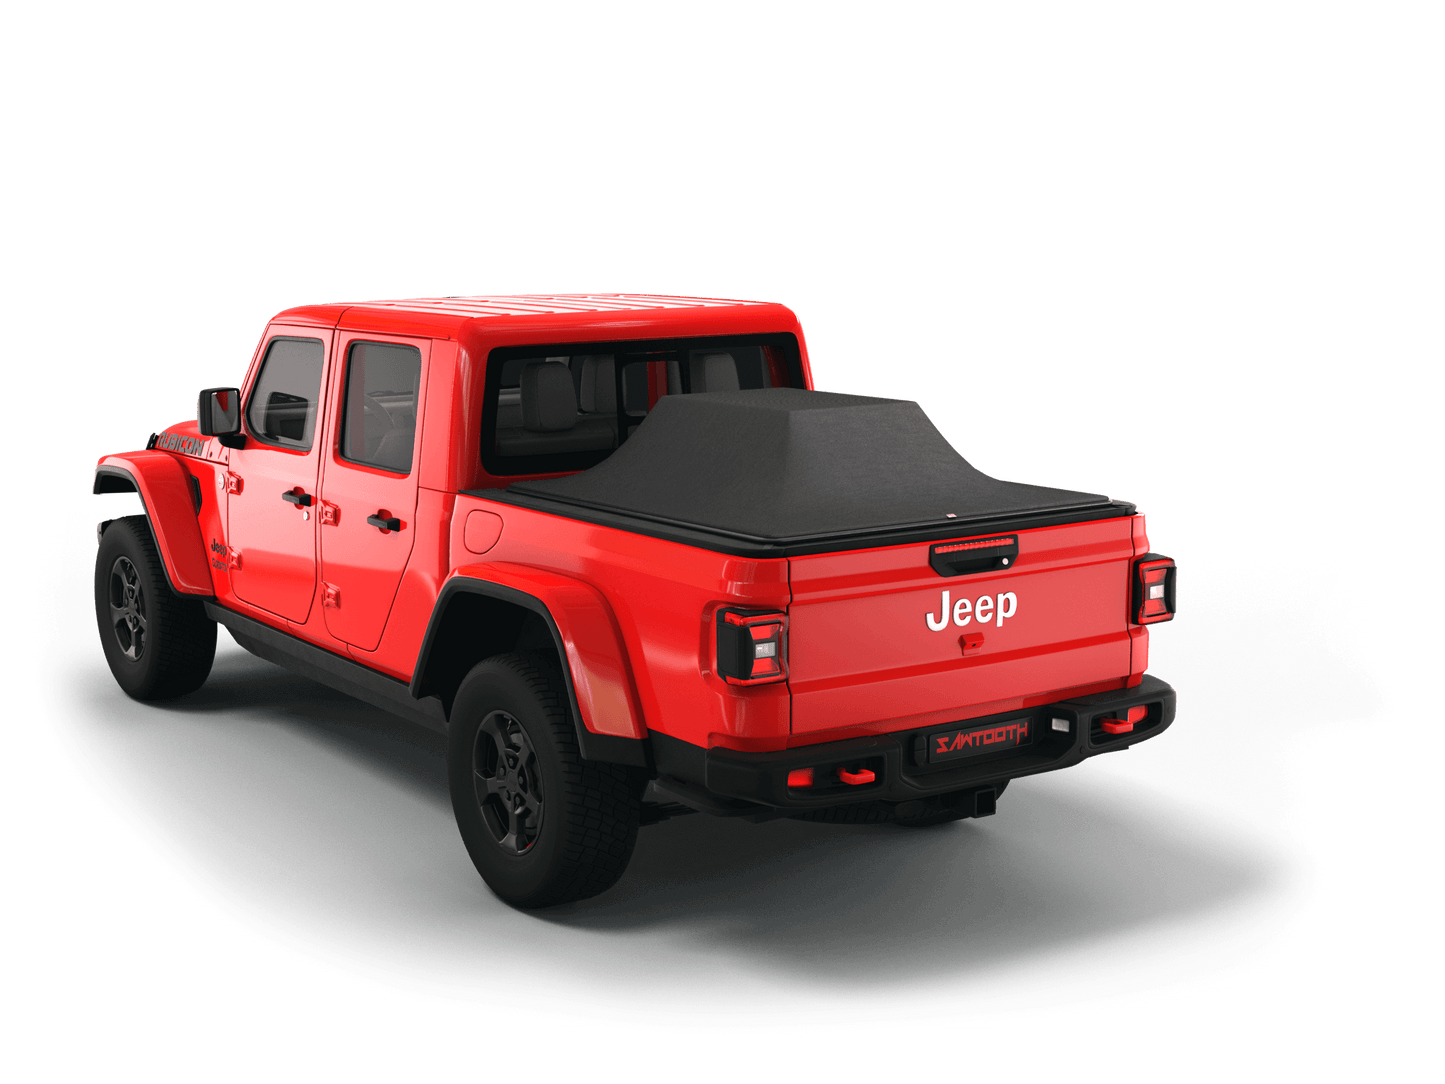 Red Jeep Gladiator with gear in the truck bed and the Sawtooth Stretch tonneau cover expanded over cargo load